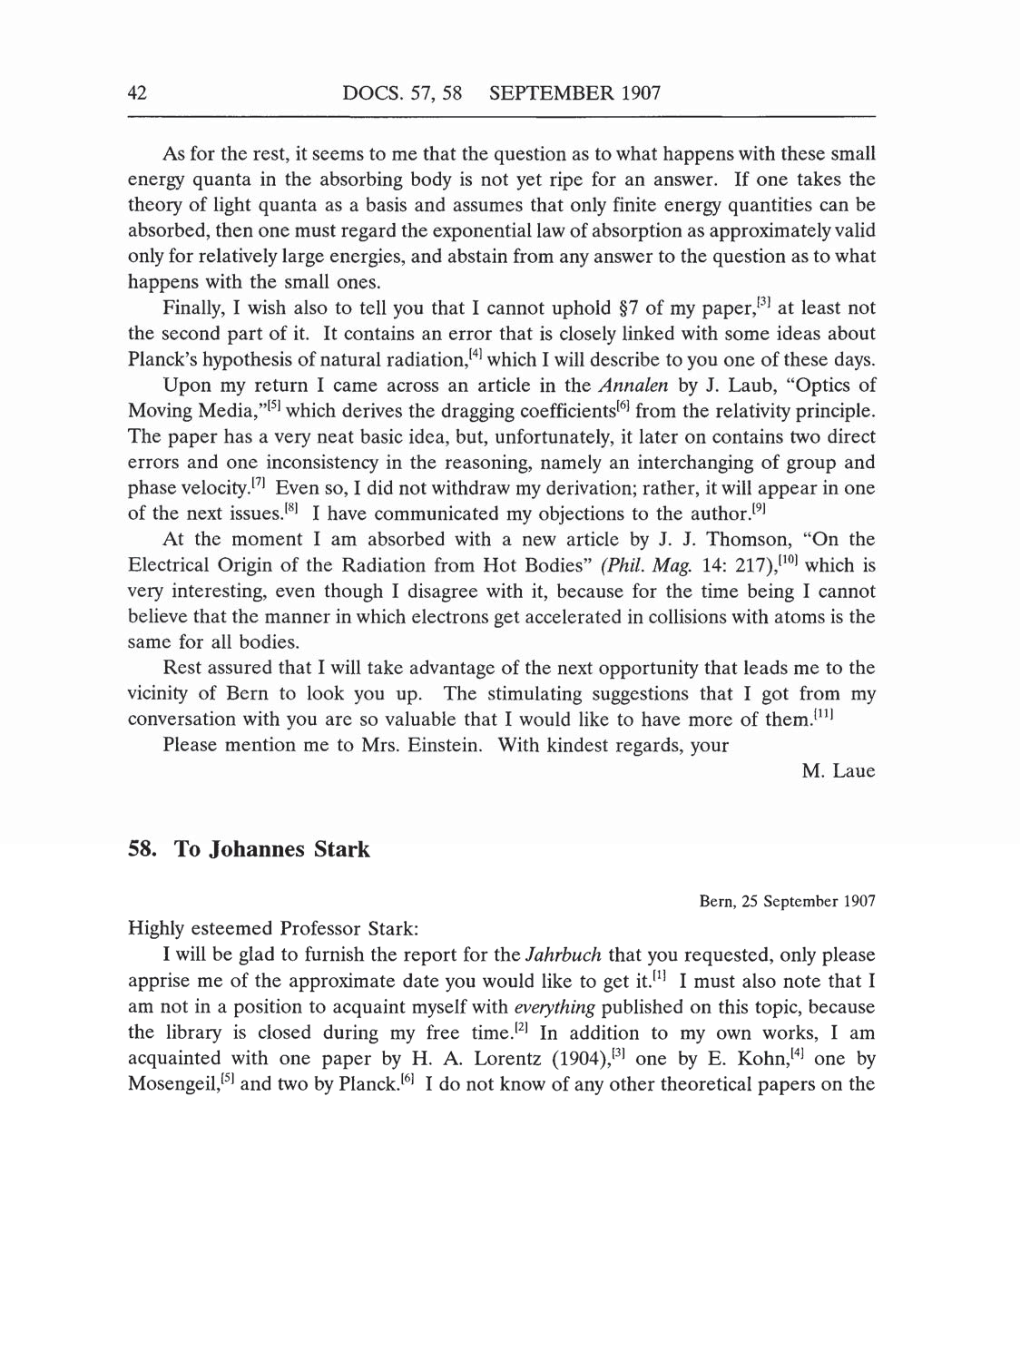 Volume 5: The Swiss Years: Correspondence, 1902-1914 (English translation supplement) page 42